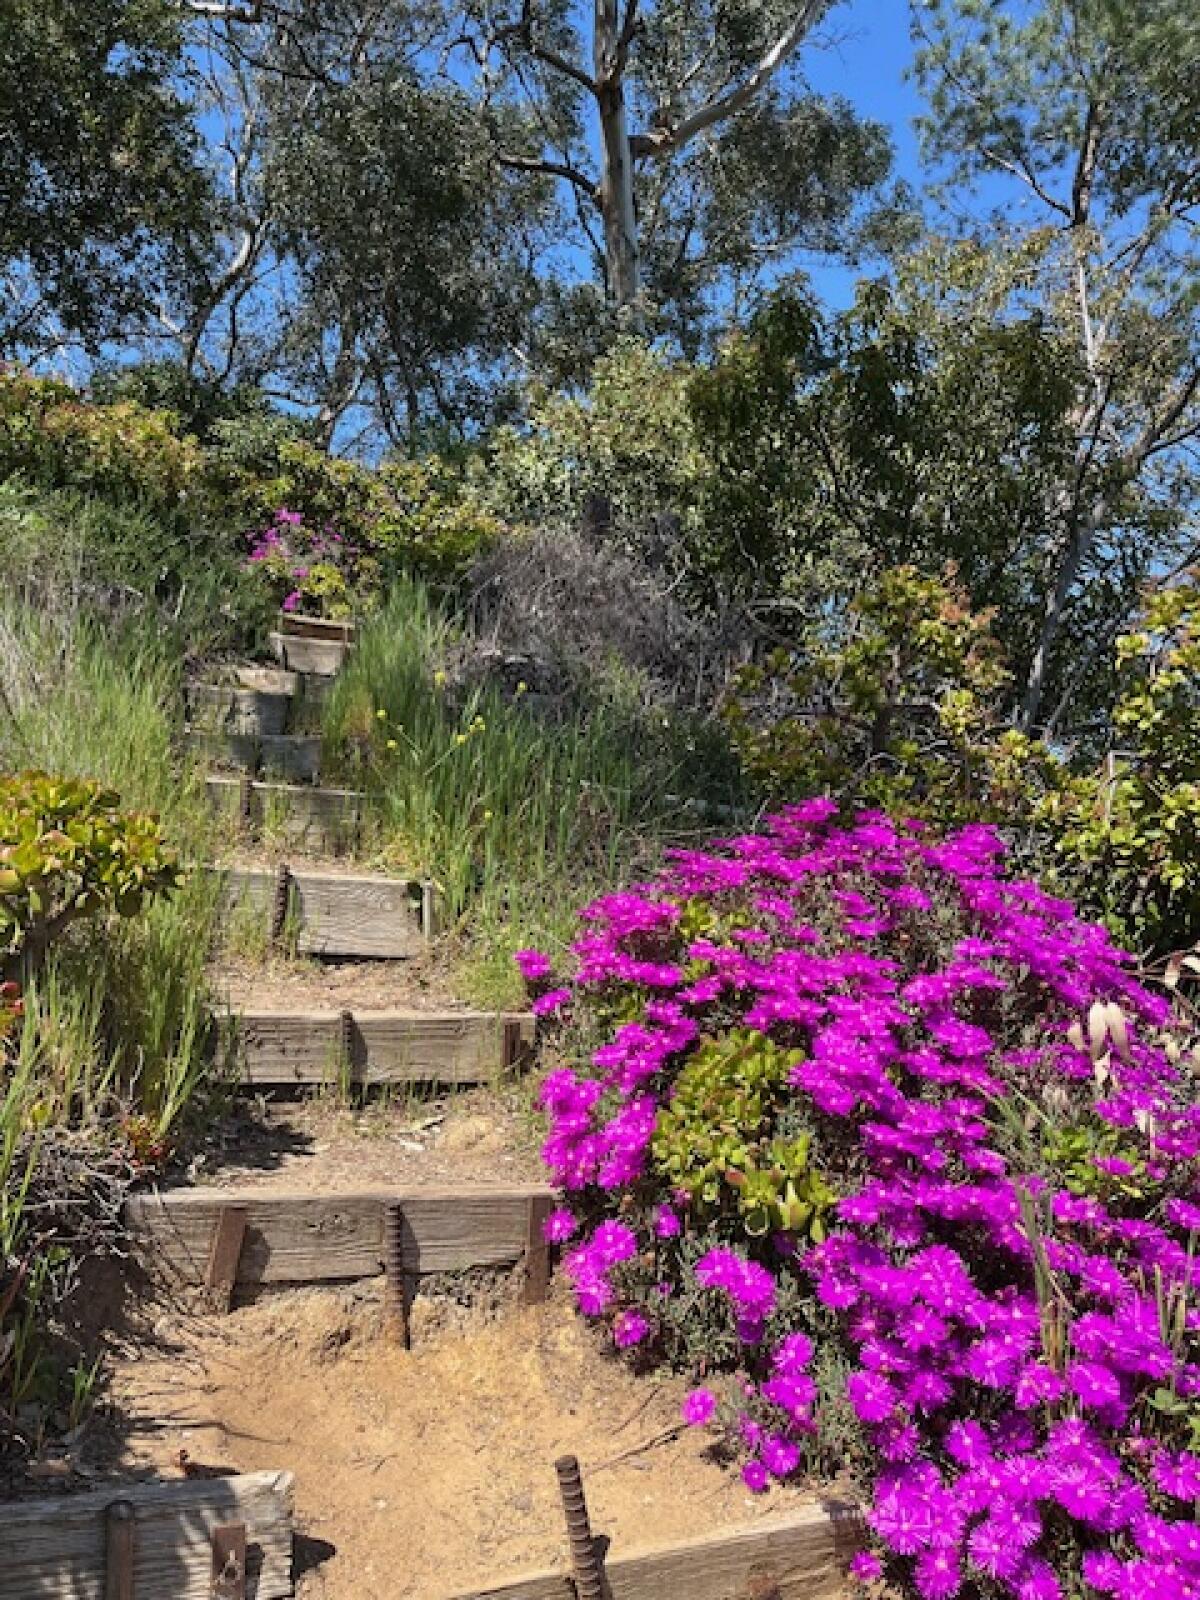 A wooden hillside staircase with pink blooming flowers at its base. 